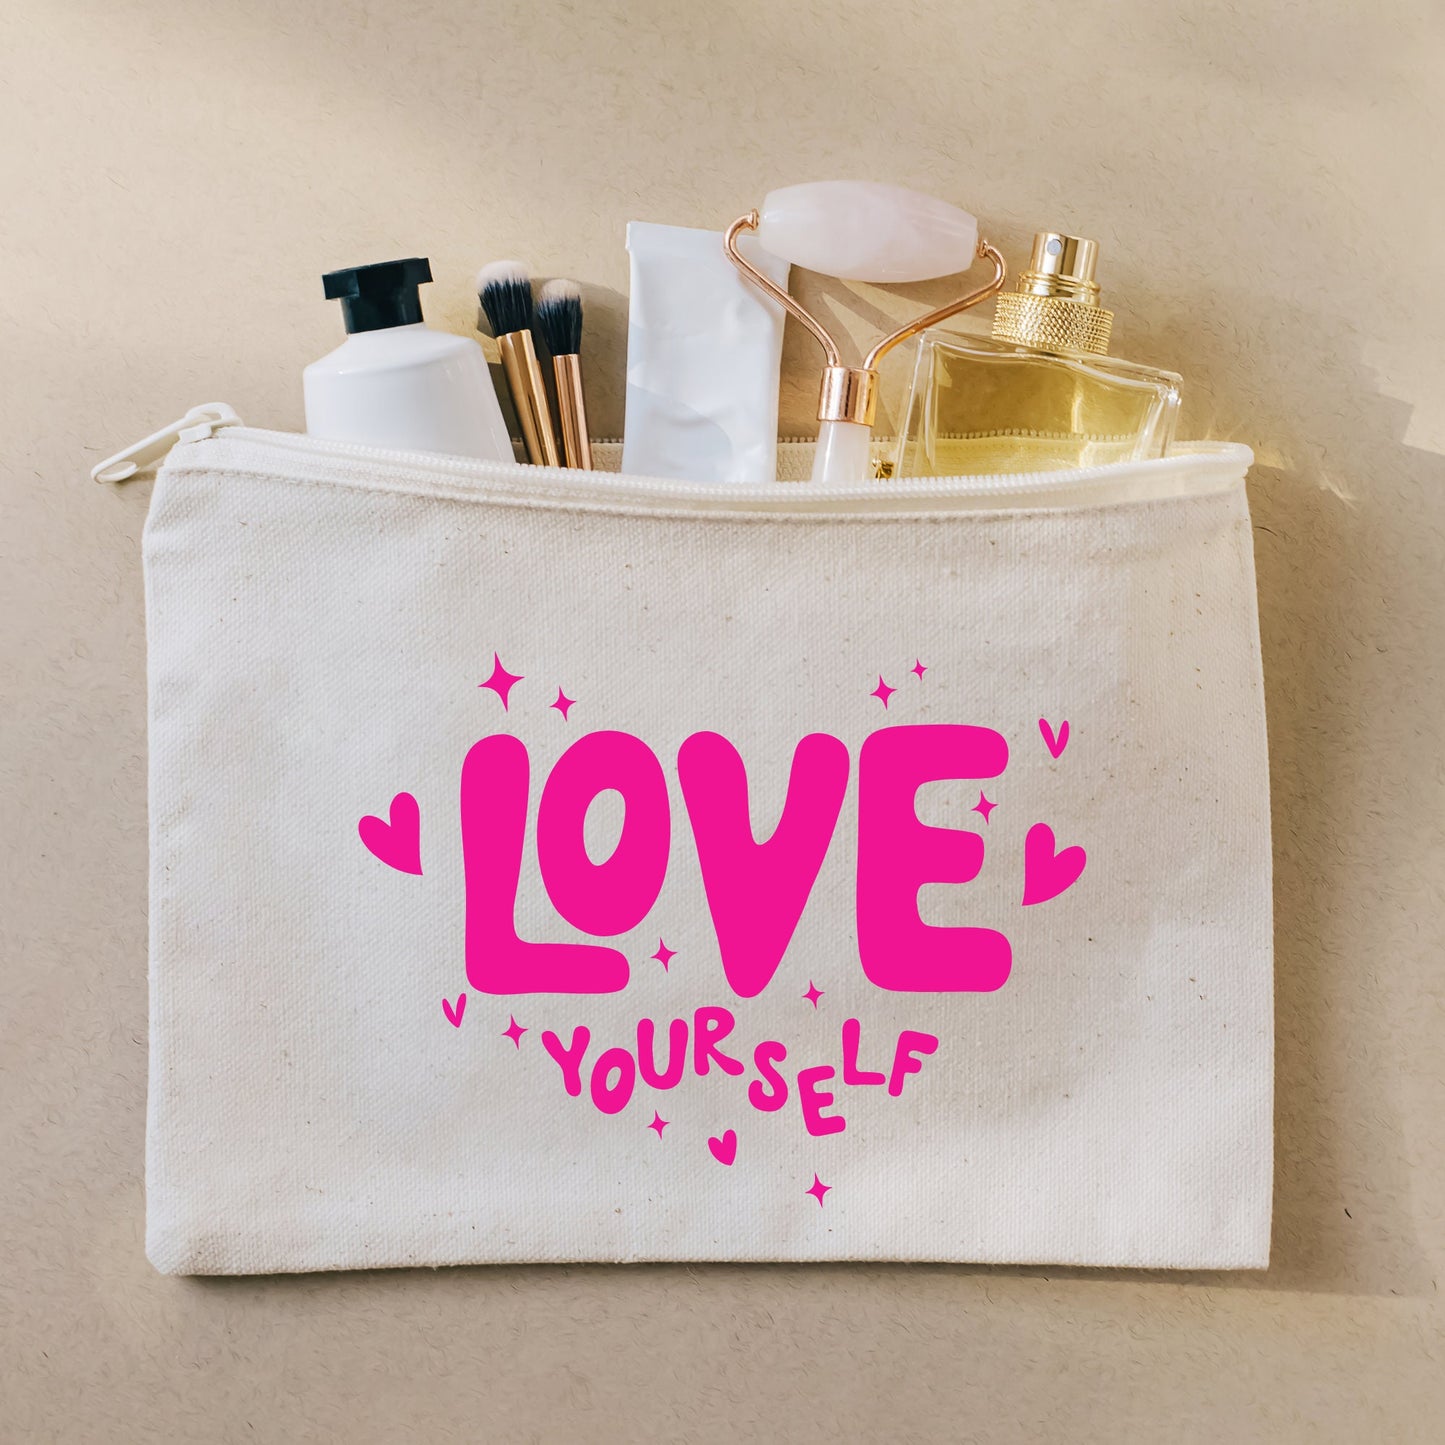 Make Up Bag, Love Yourself Pouch, Teen Daughter Birthday Gift, Make up Brush Bag, Friend Gifts, Travel Accessories